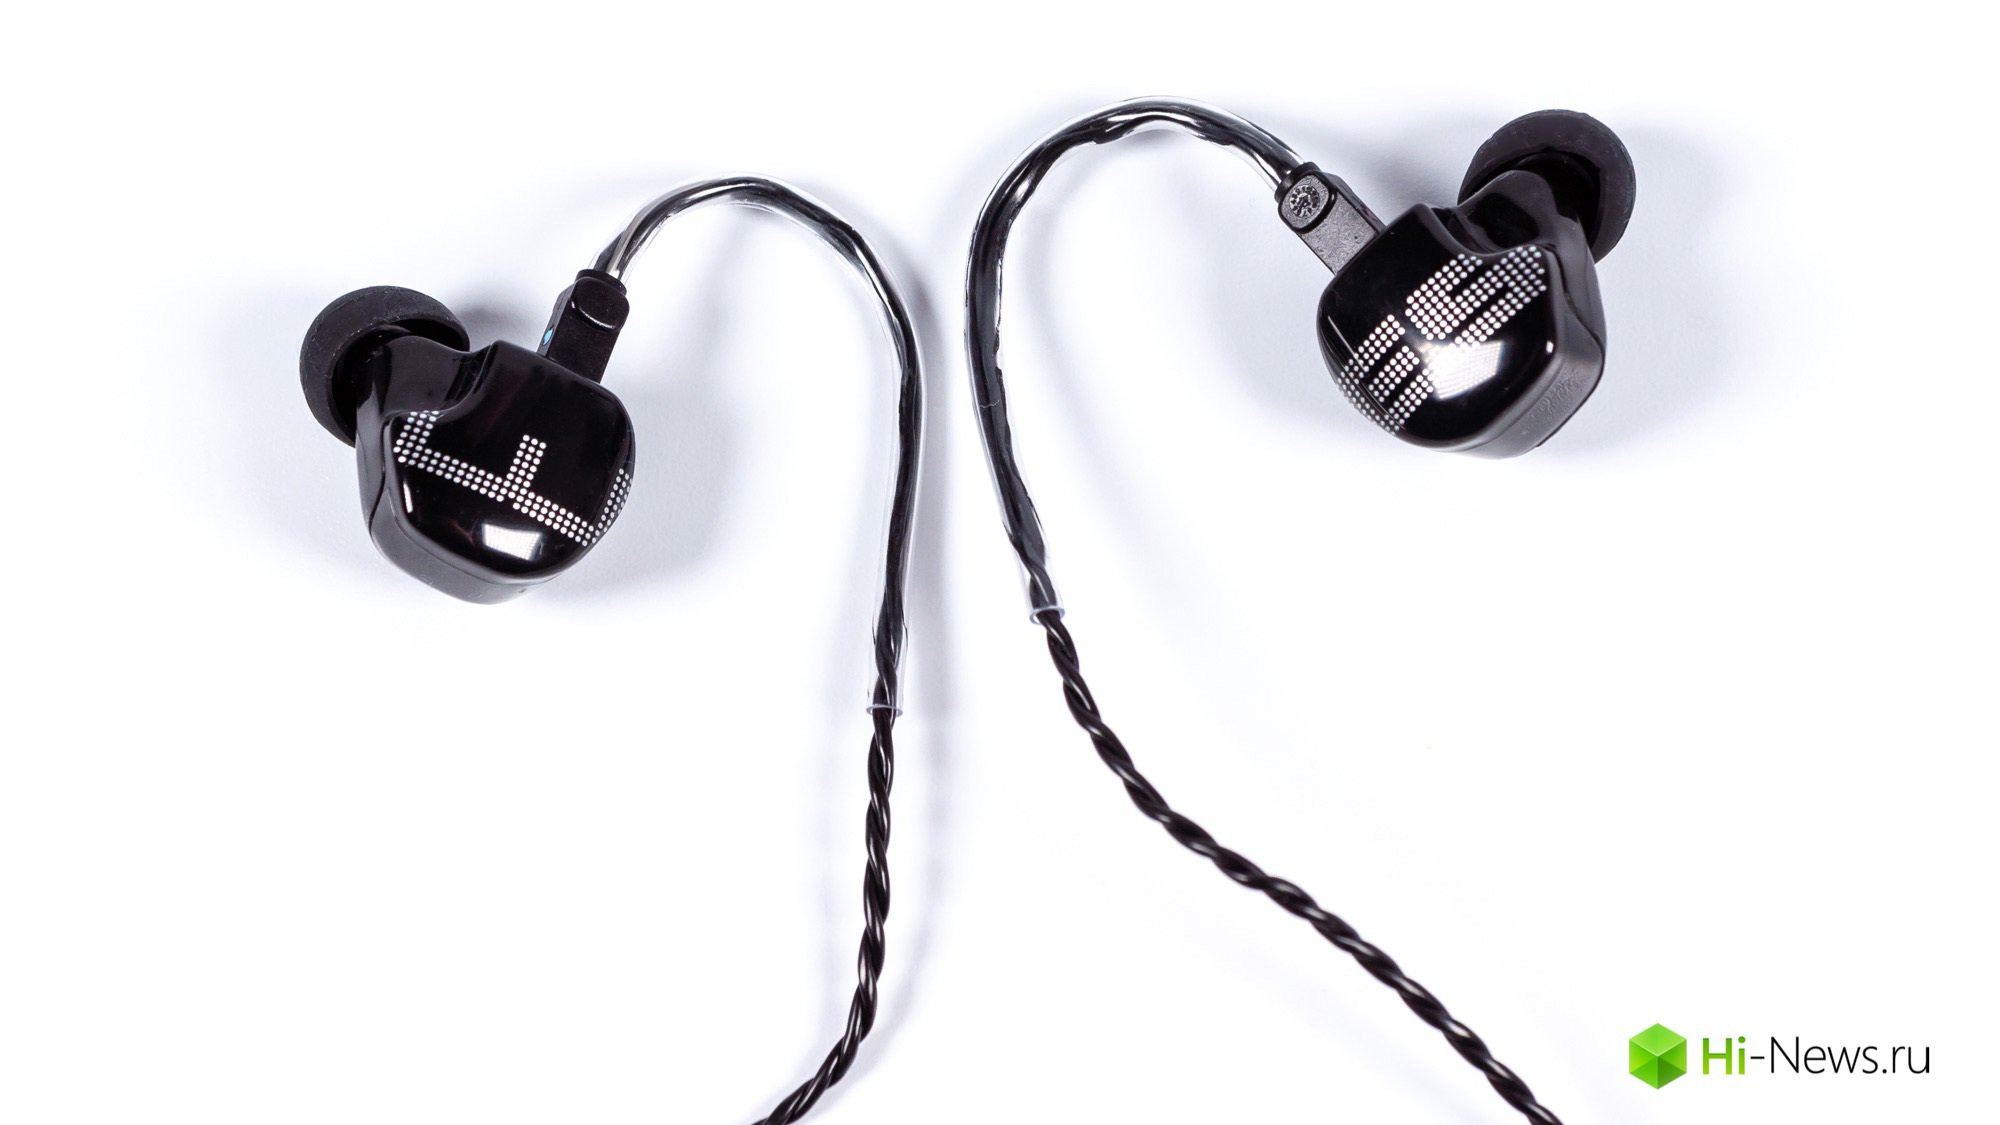 Review EarSonics earphones ES3 — signature sound from France